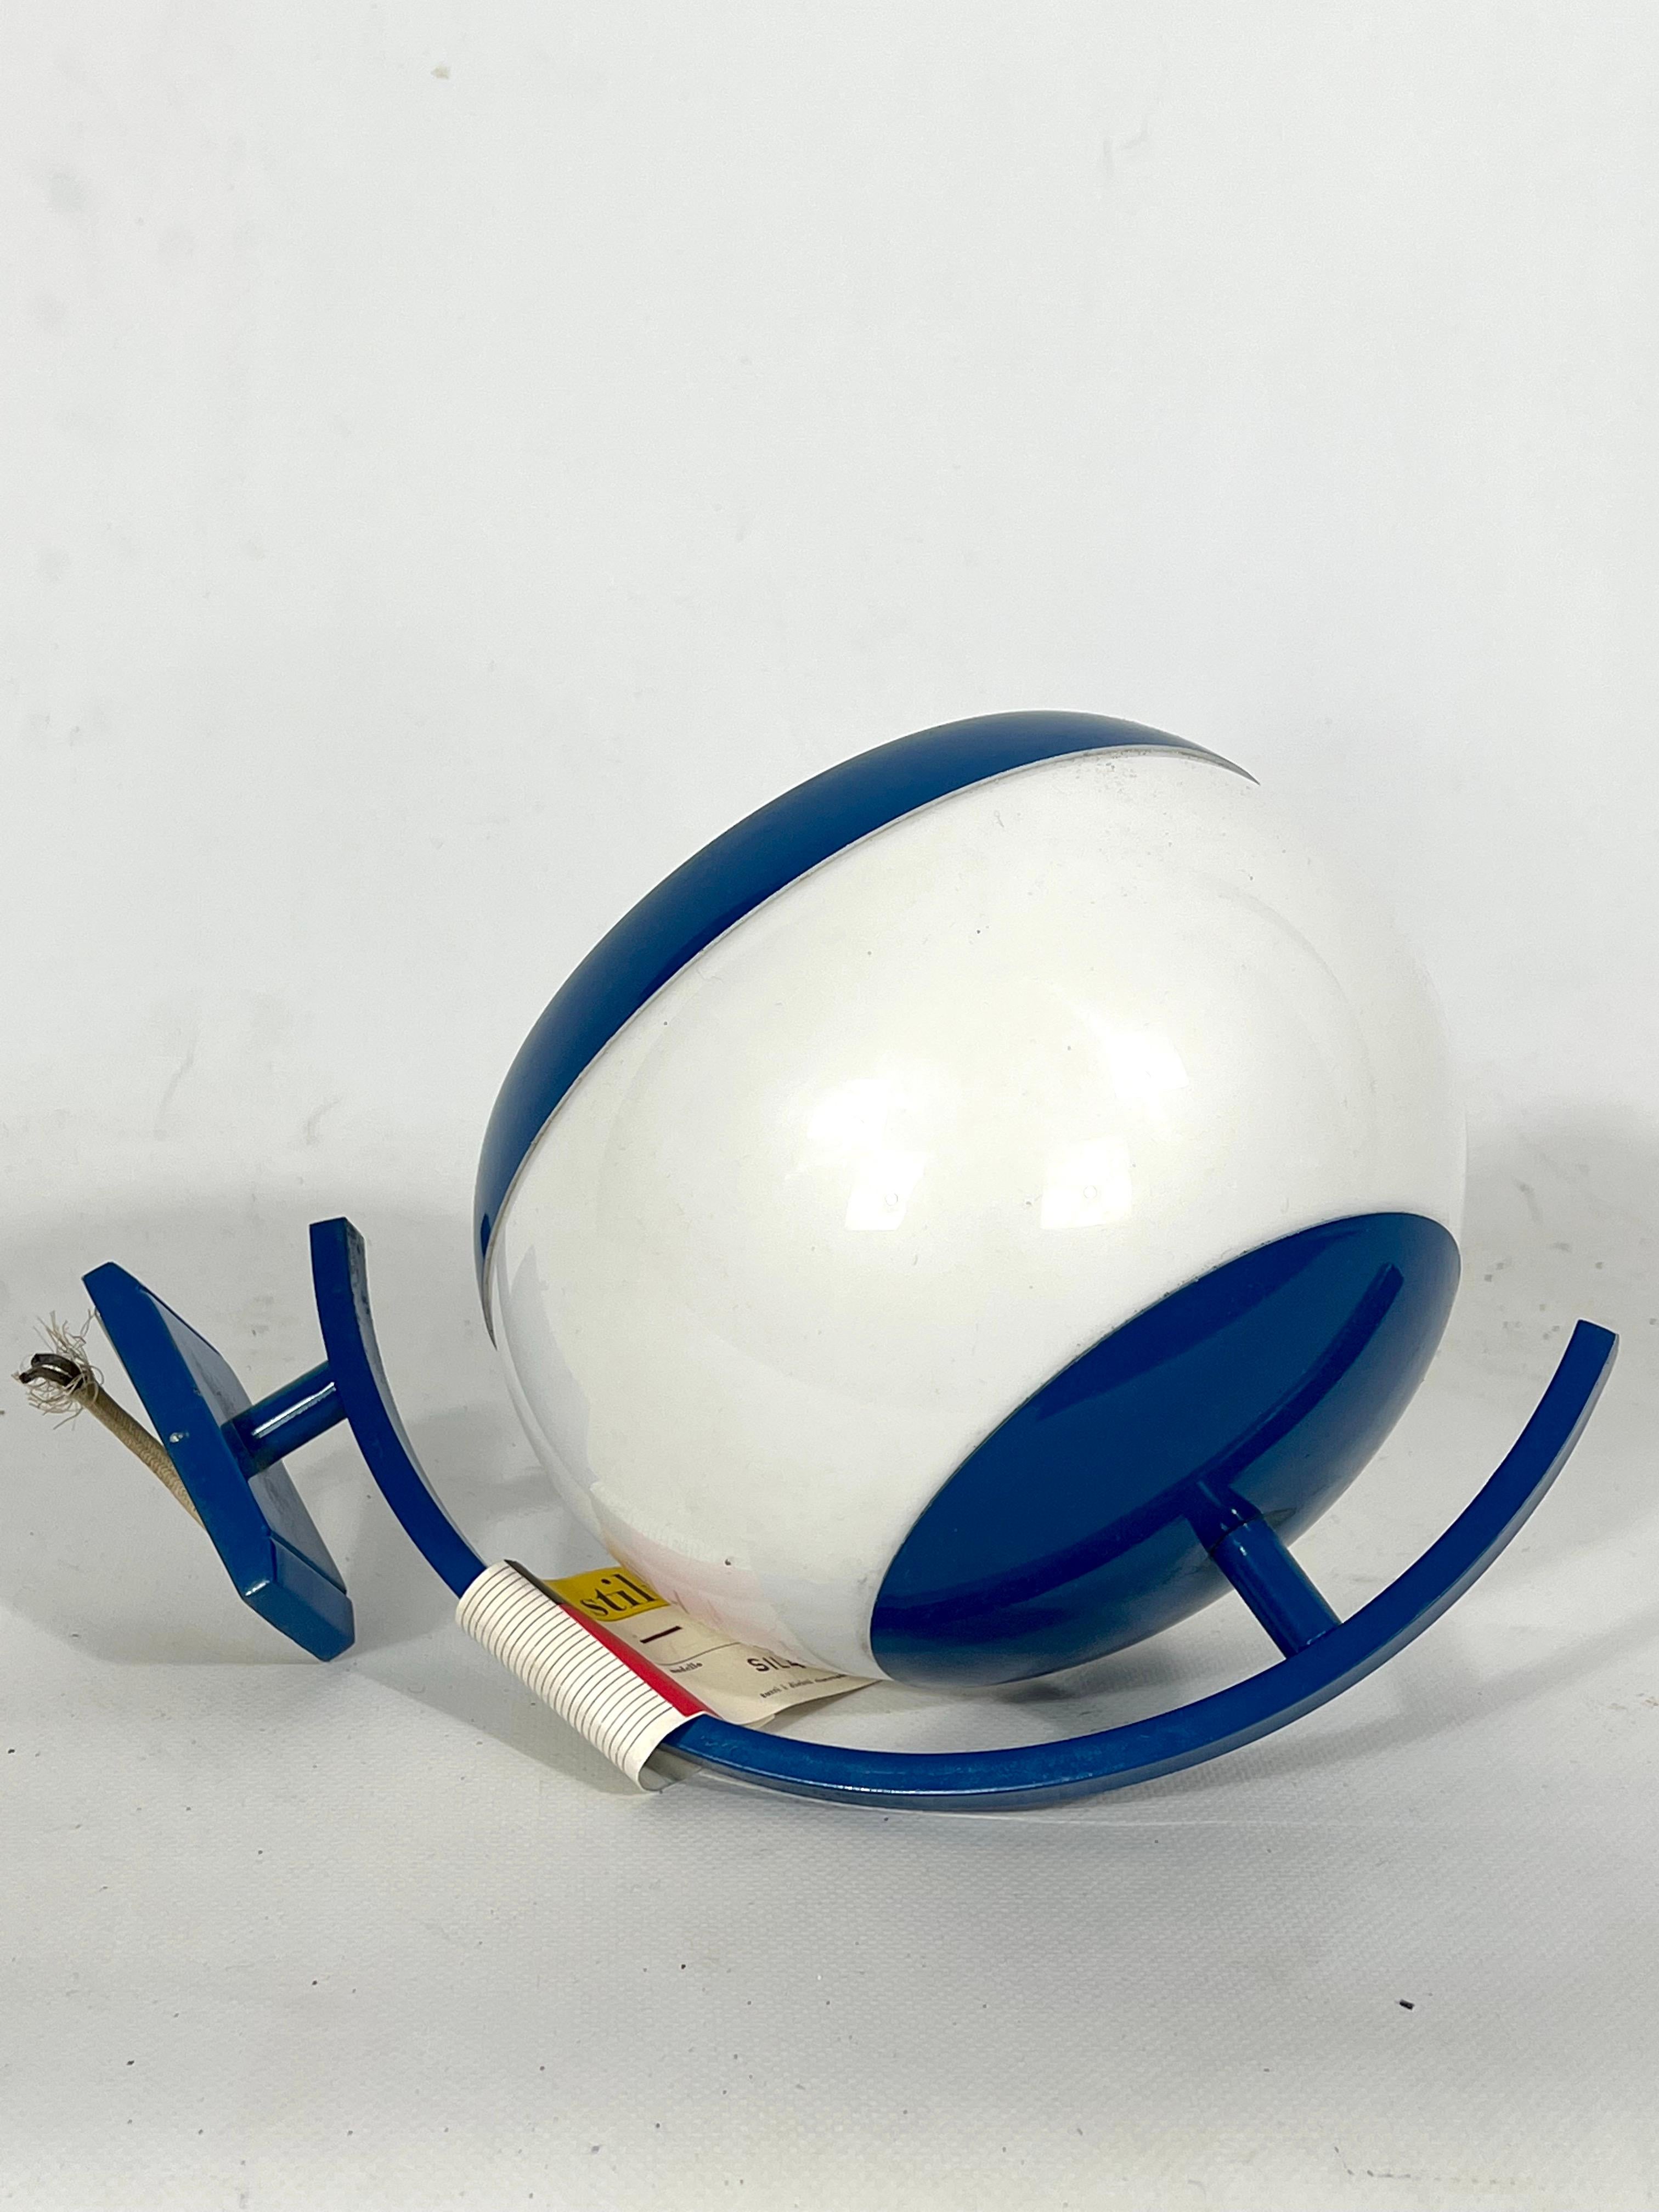 Lacquered Stilux Milano, Single Blu Lacquer and Perspex Wall Lamp Model Sila, Italy, 1960s For Sale